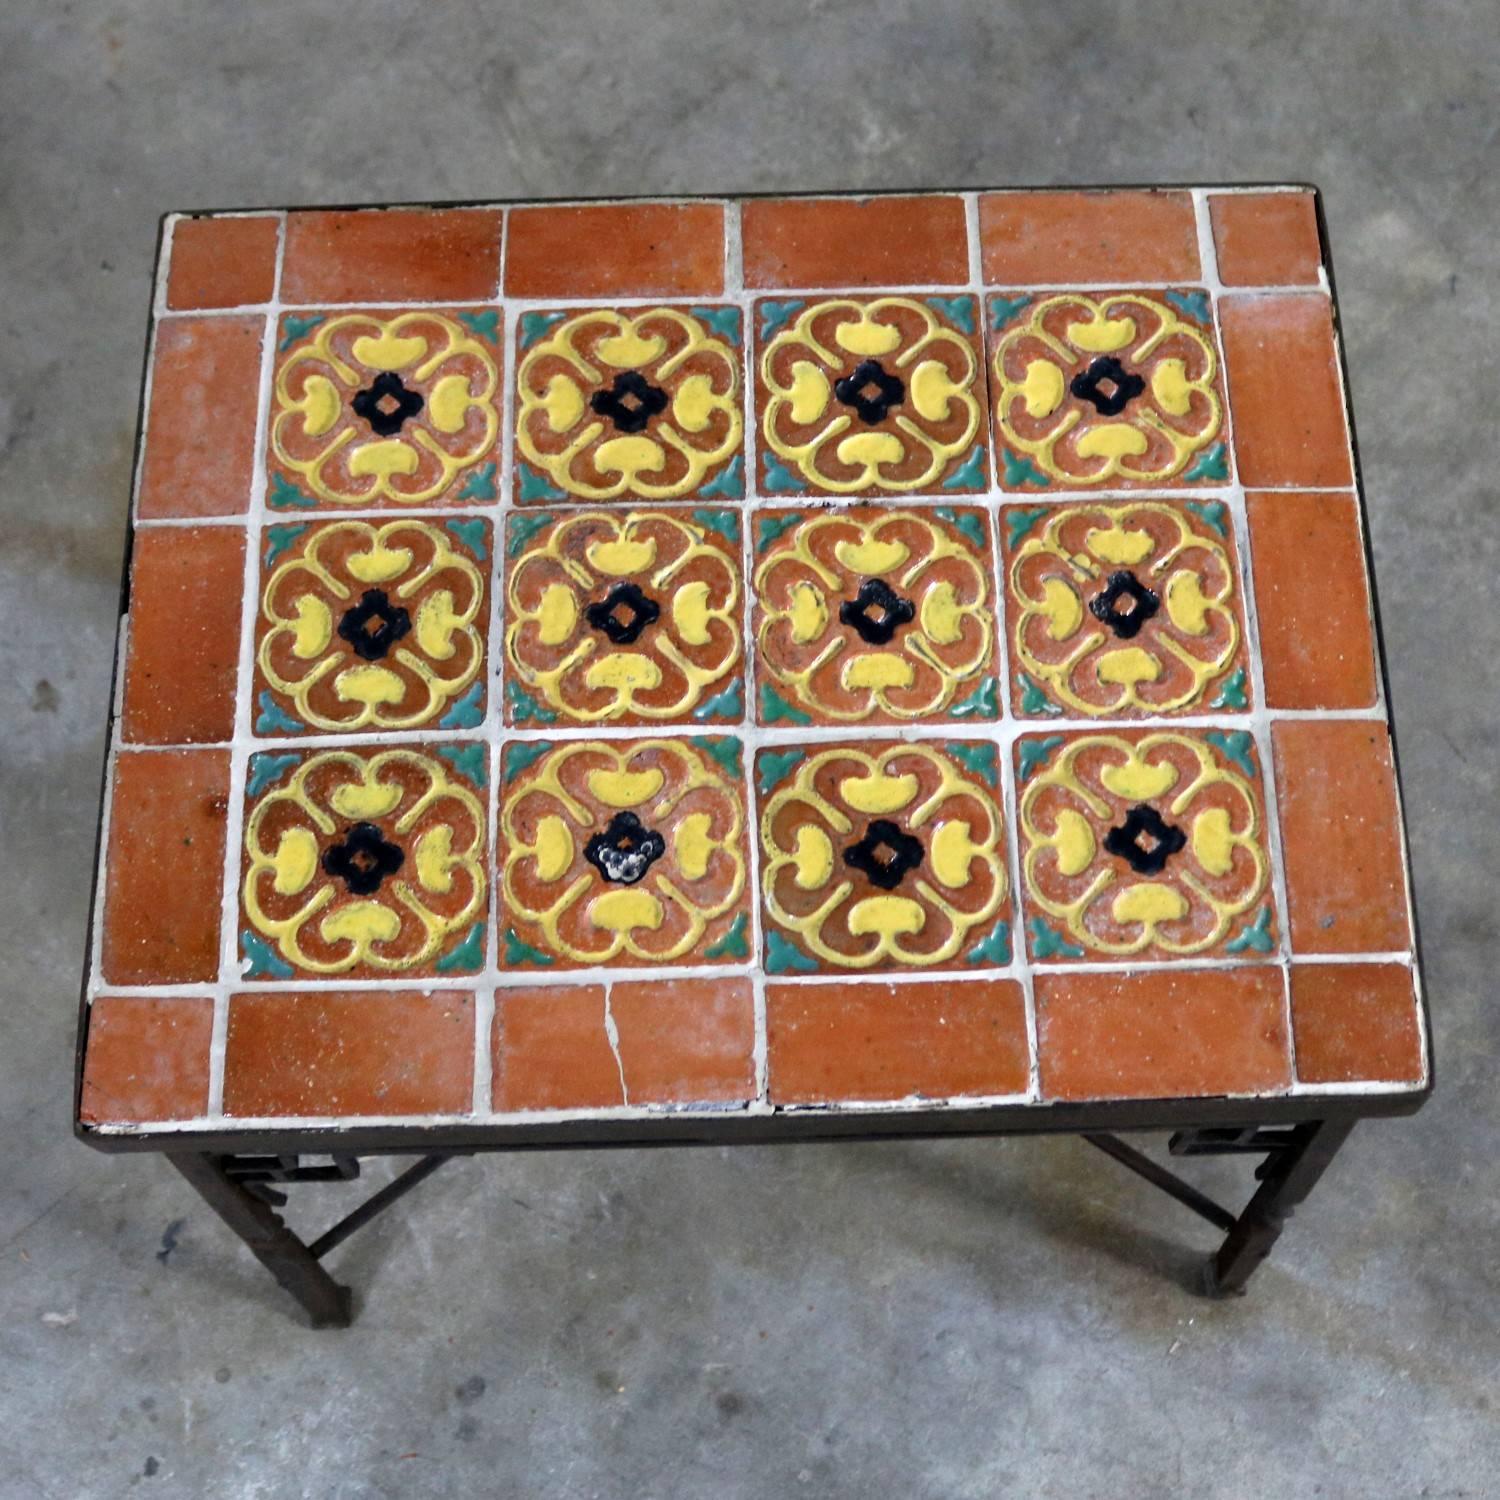 20th Century Art Deco Wrought Iron and Tile Side Table California Style Tiles